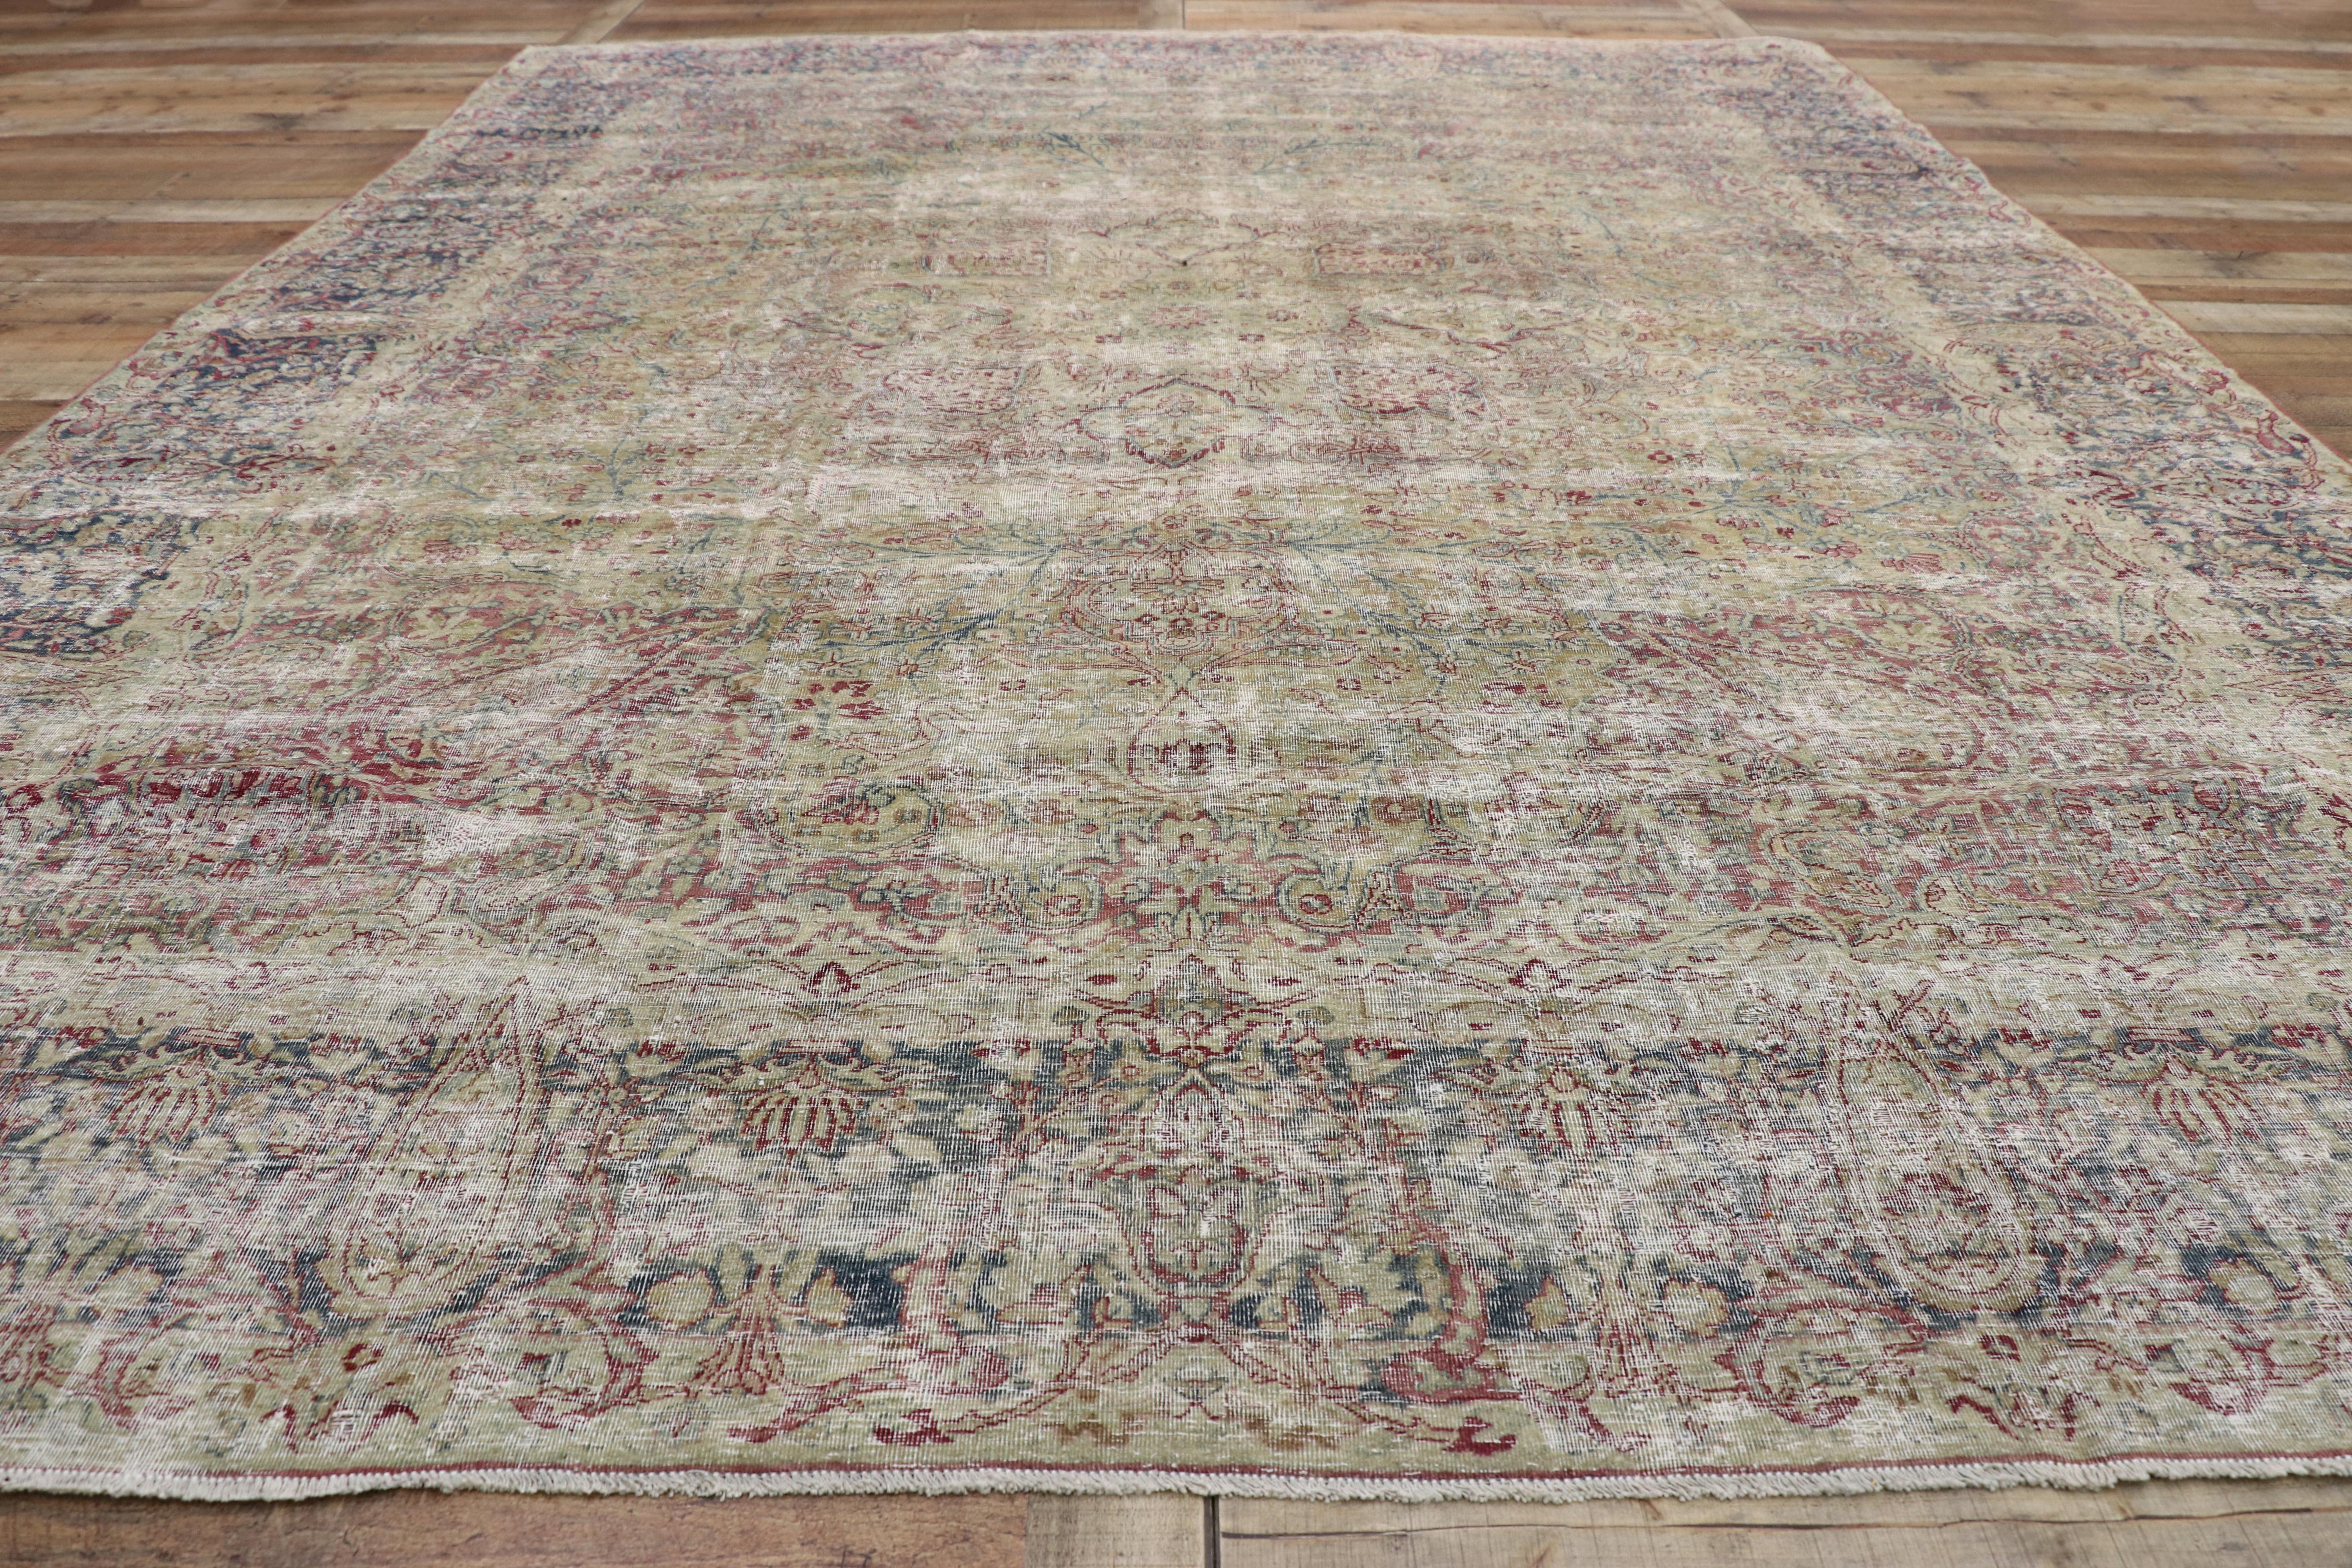 Distressed Antique Persian Kerman Rug with Modern Rustic English Cottage Style For Sale 4